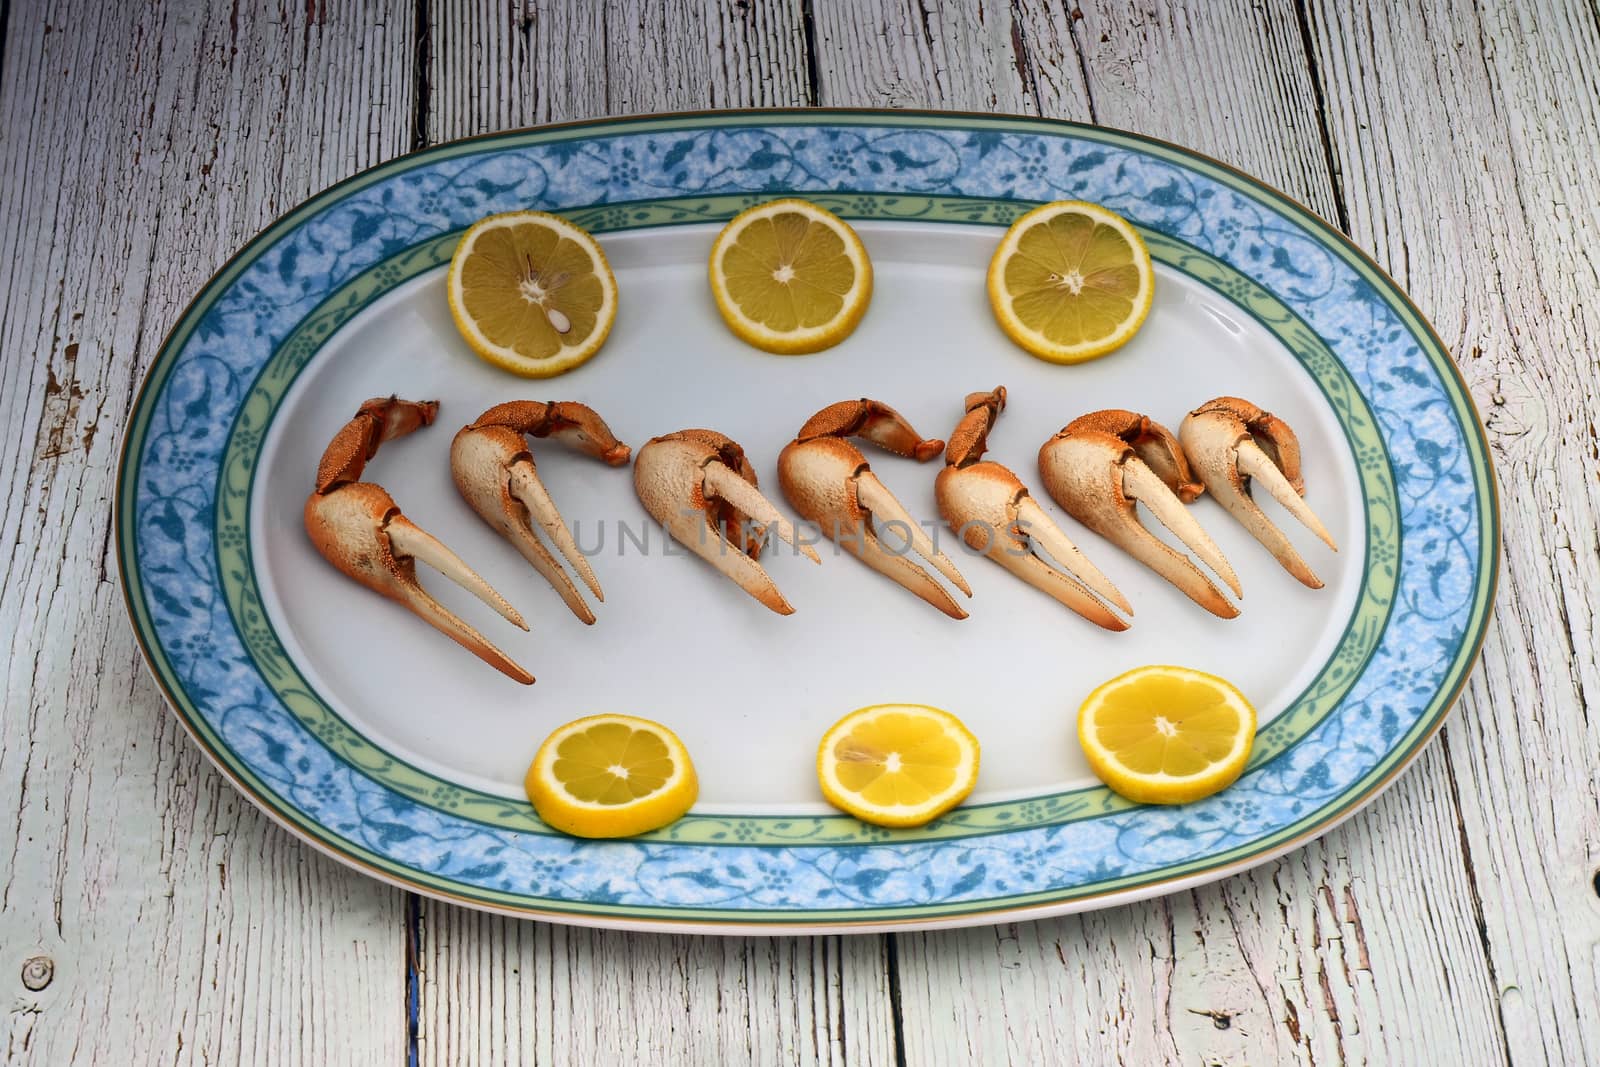 Cooked fiddler crab claws and lemon wedges. Typical Andalusian dish